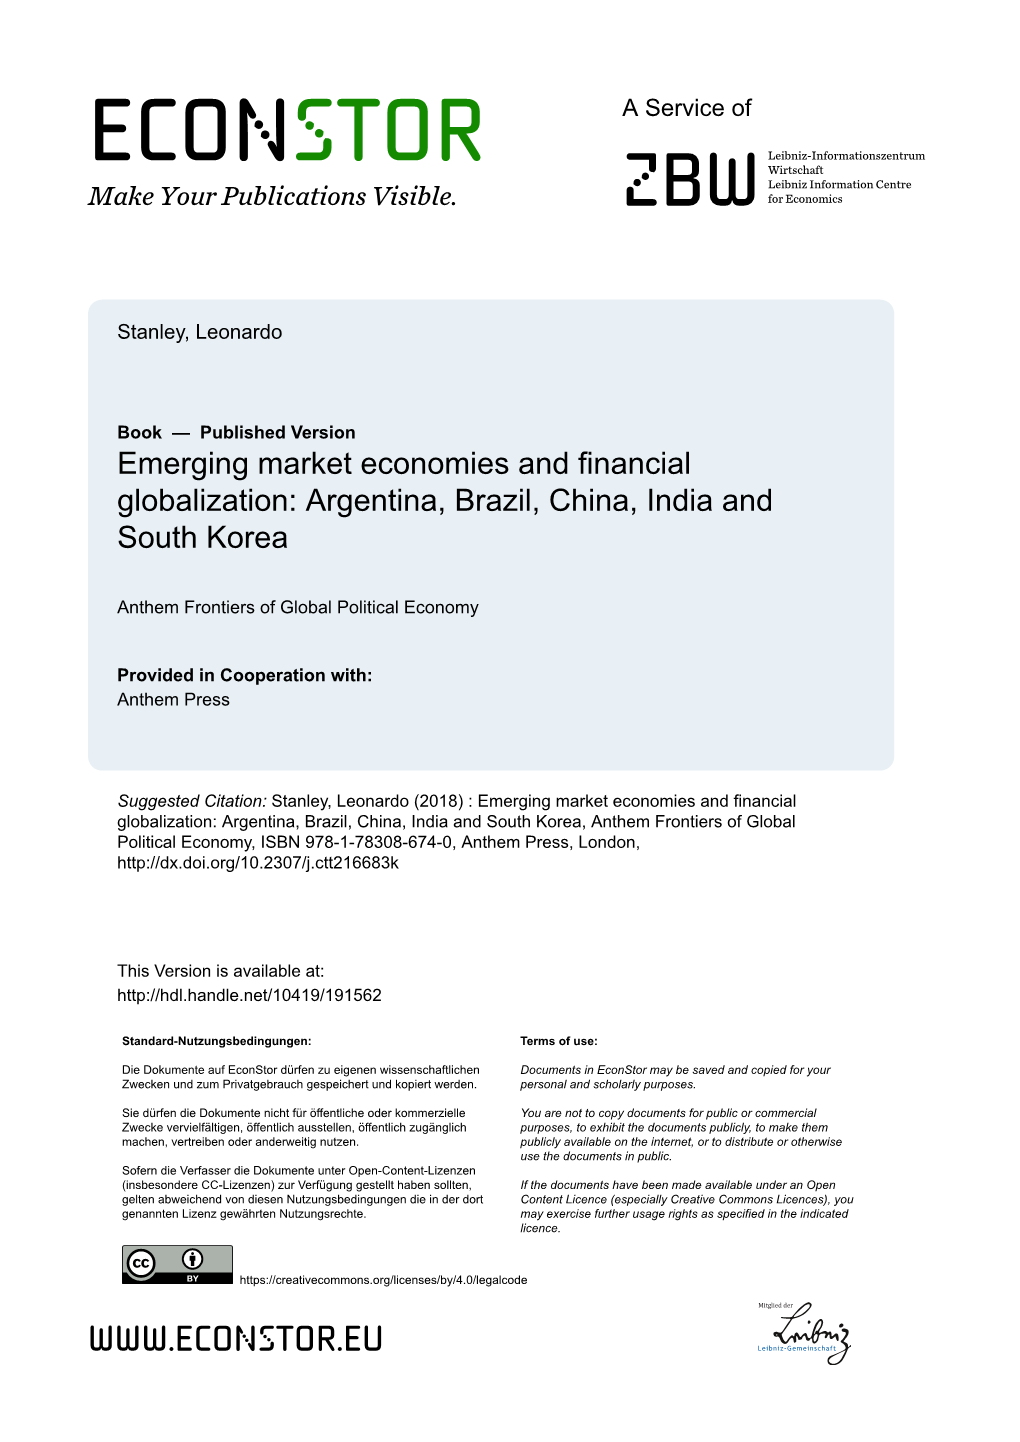 Emerging Market Economies and Financial Globalization: Argentina, Brazil, China, India and South Korea